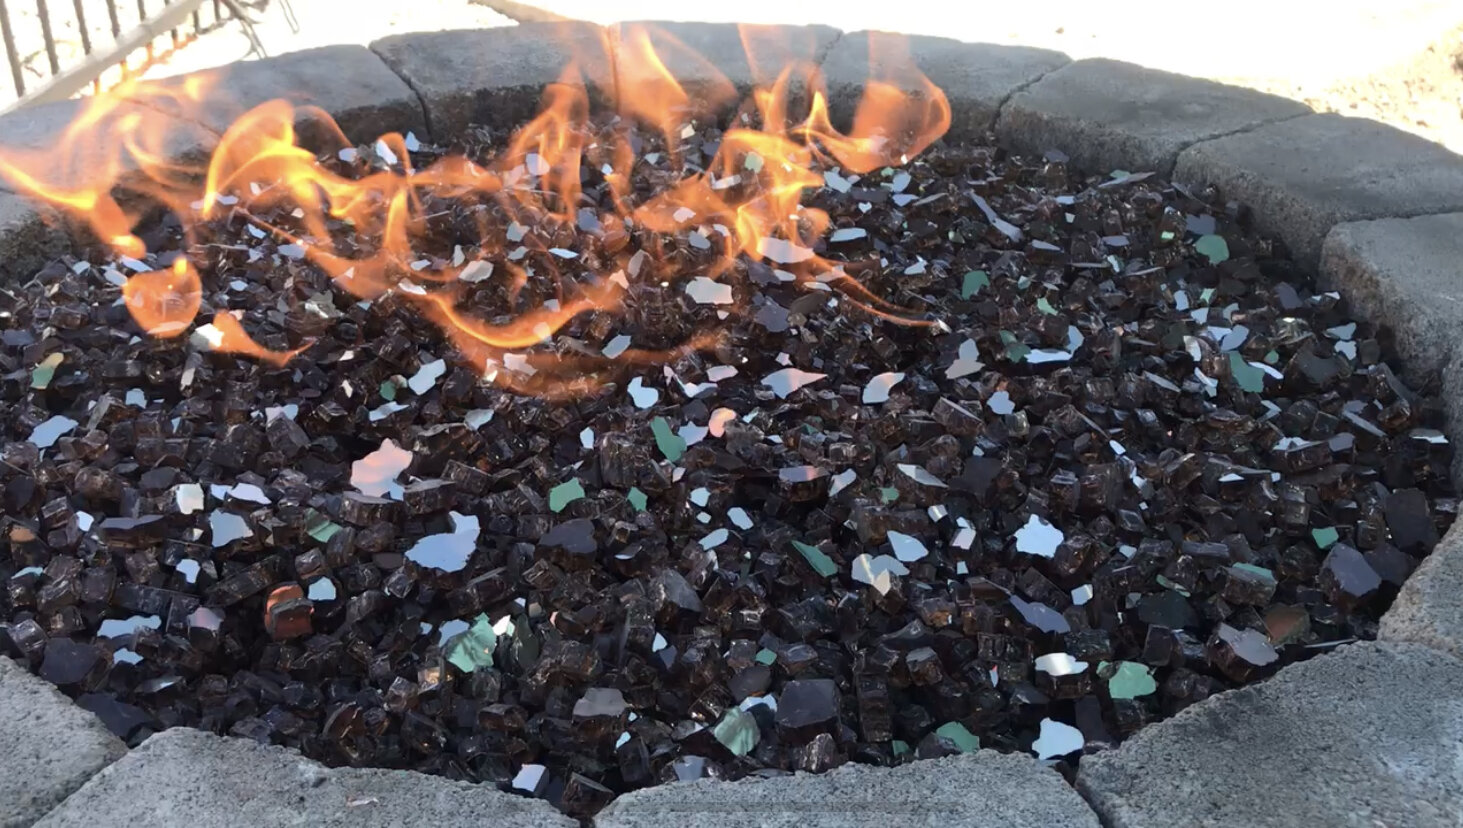 Diy Gas Fire Pit Build Maple Mtn, How To Fill A Fire Pit With Glass